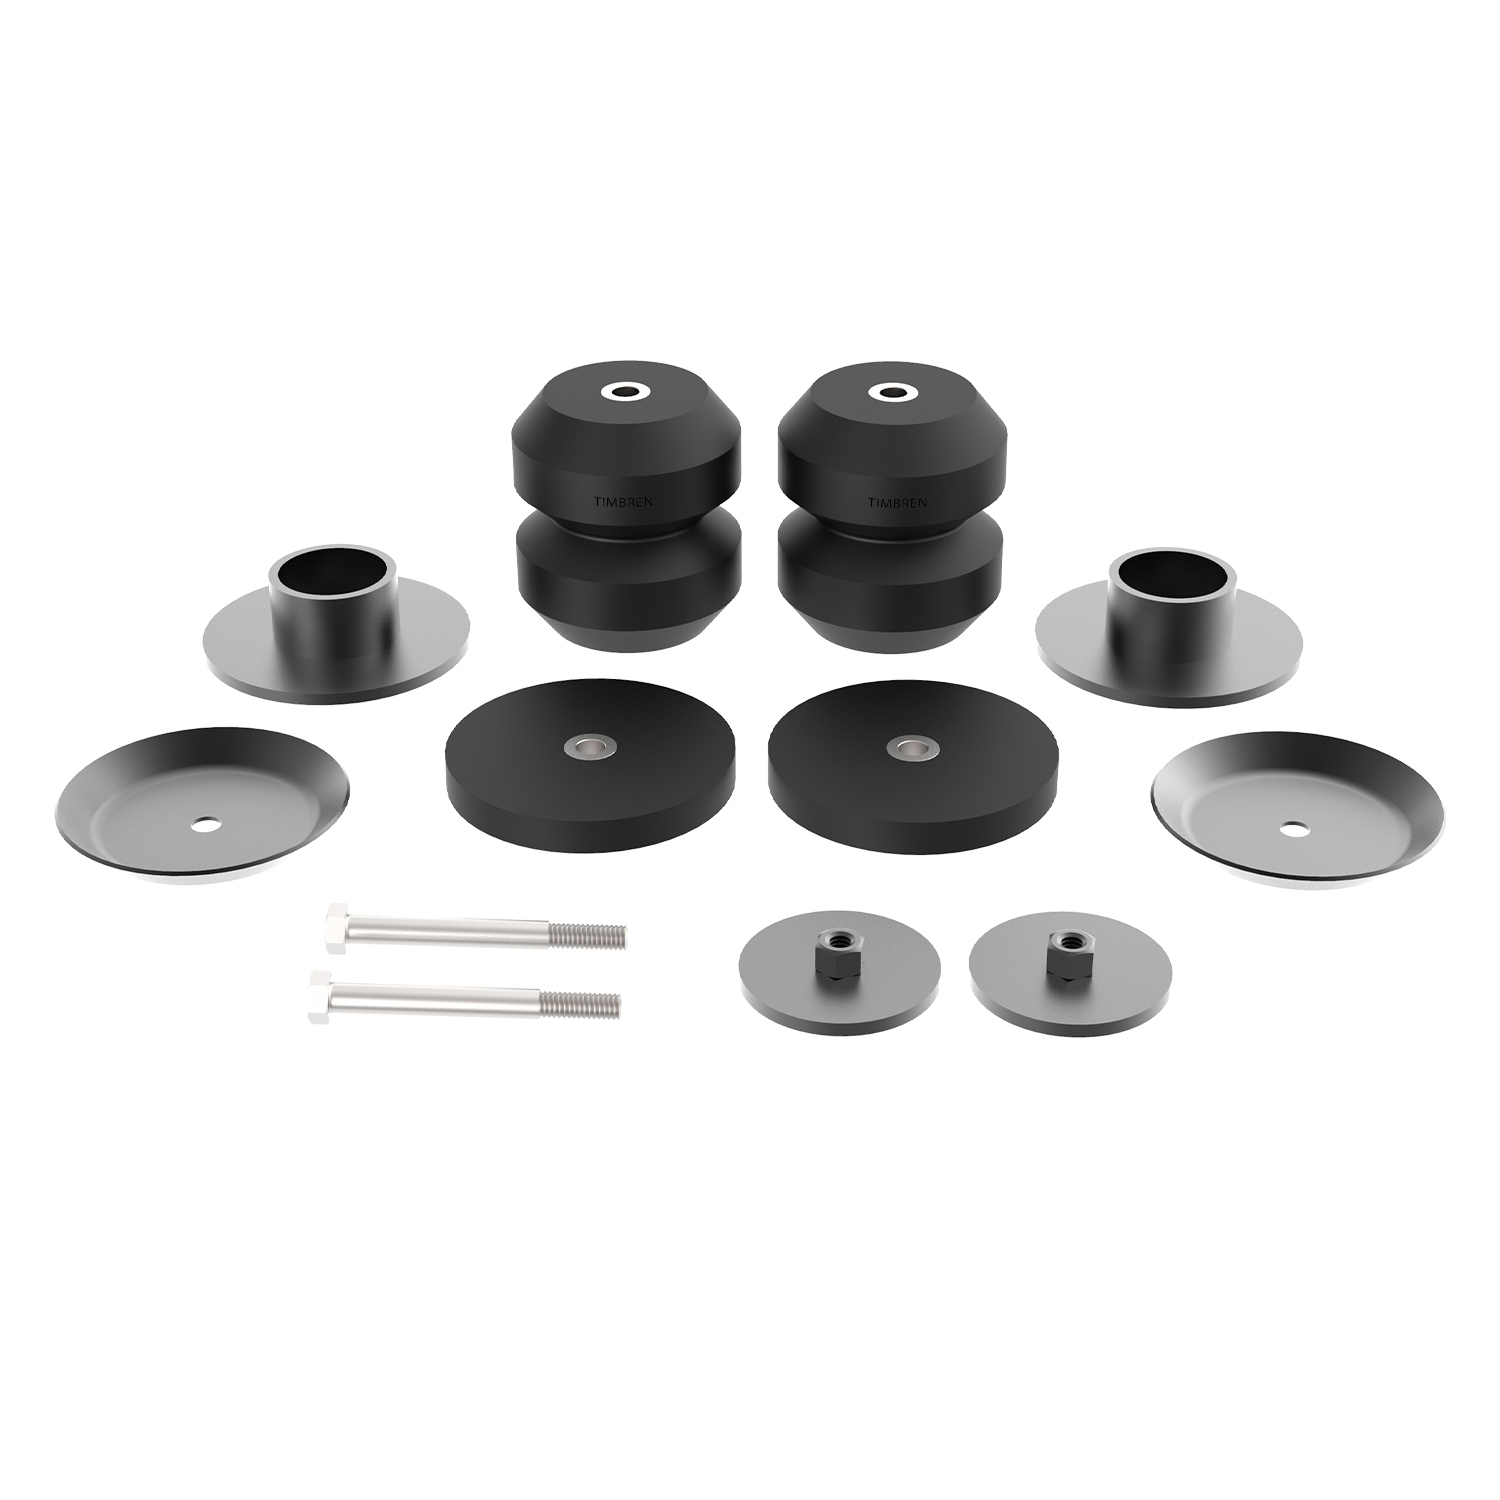 Active Off-Road Bumpstops for Jeep Gladiator - Rear Kit